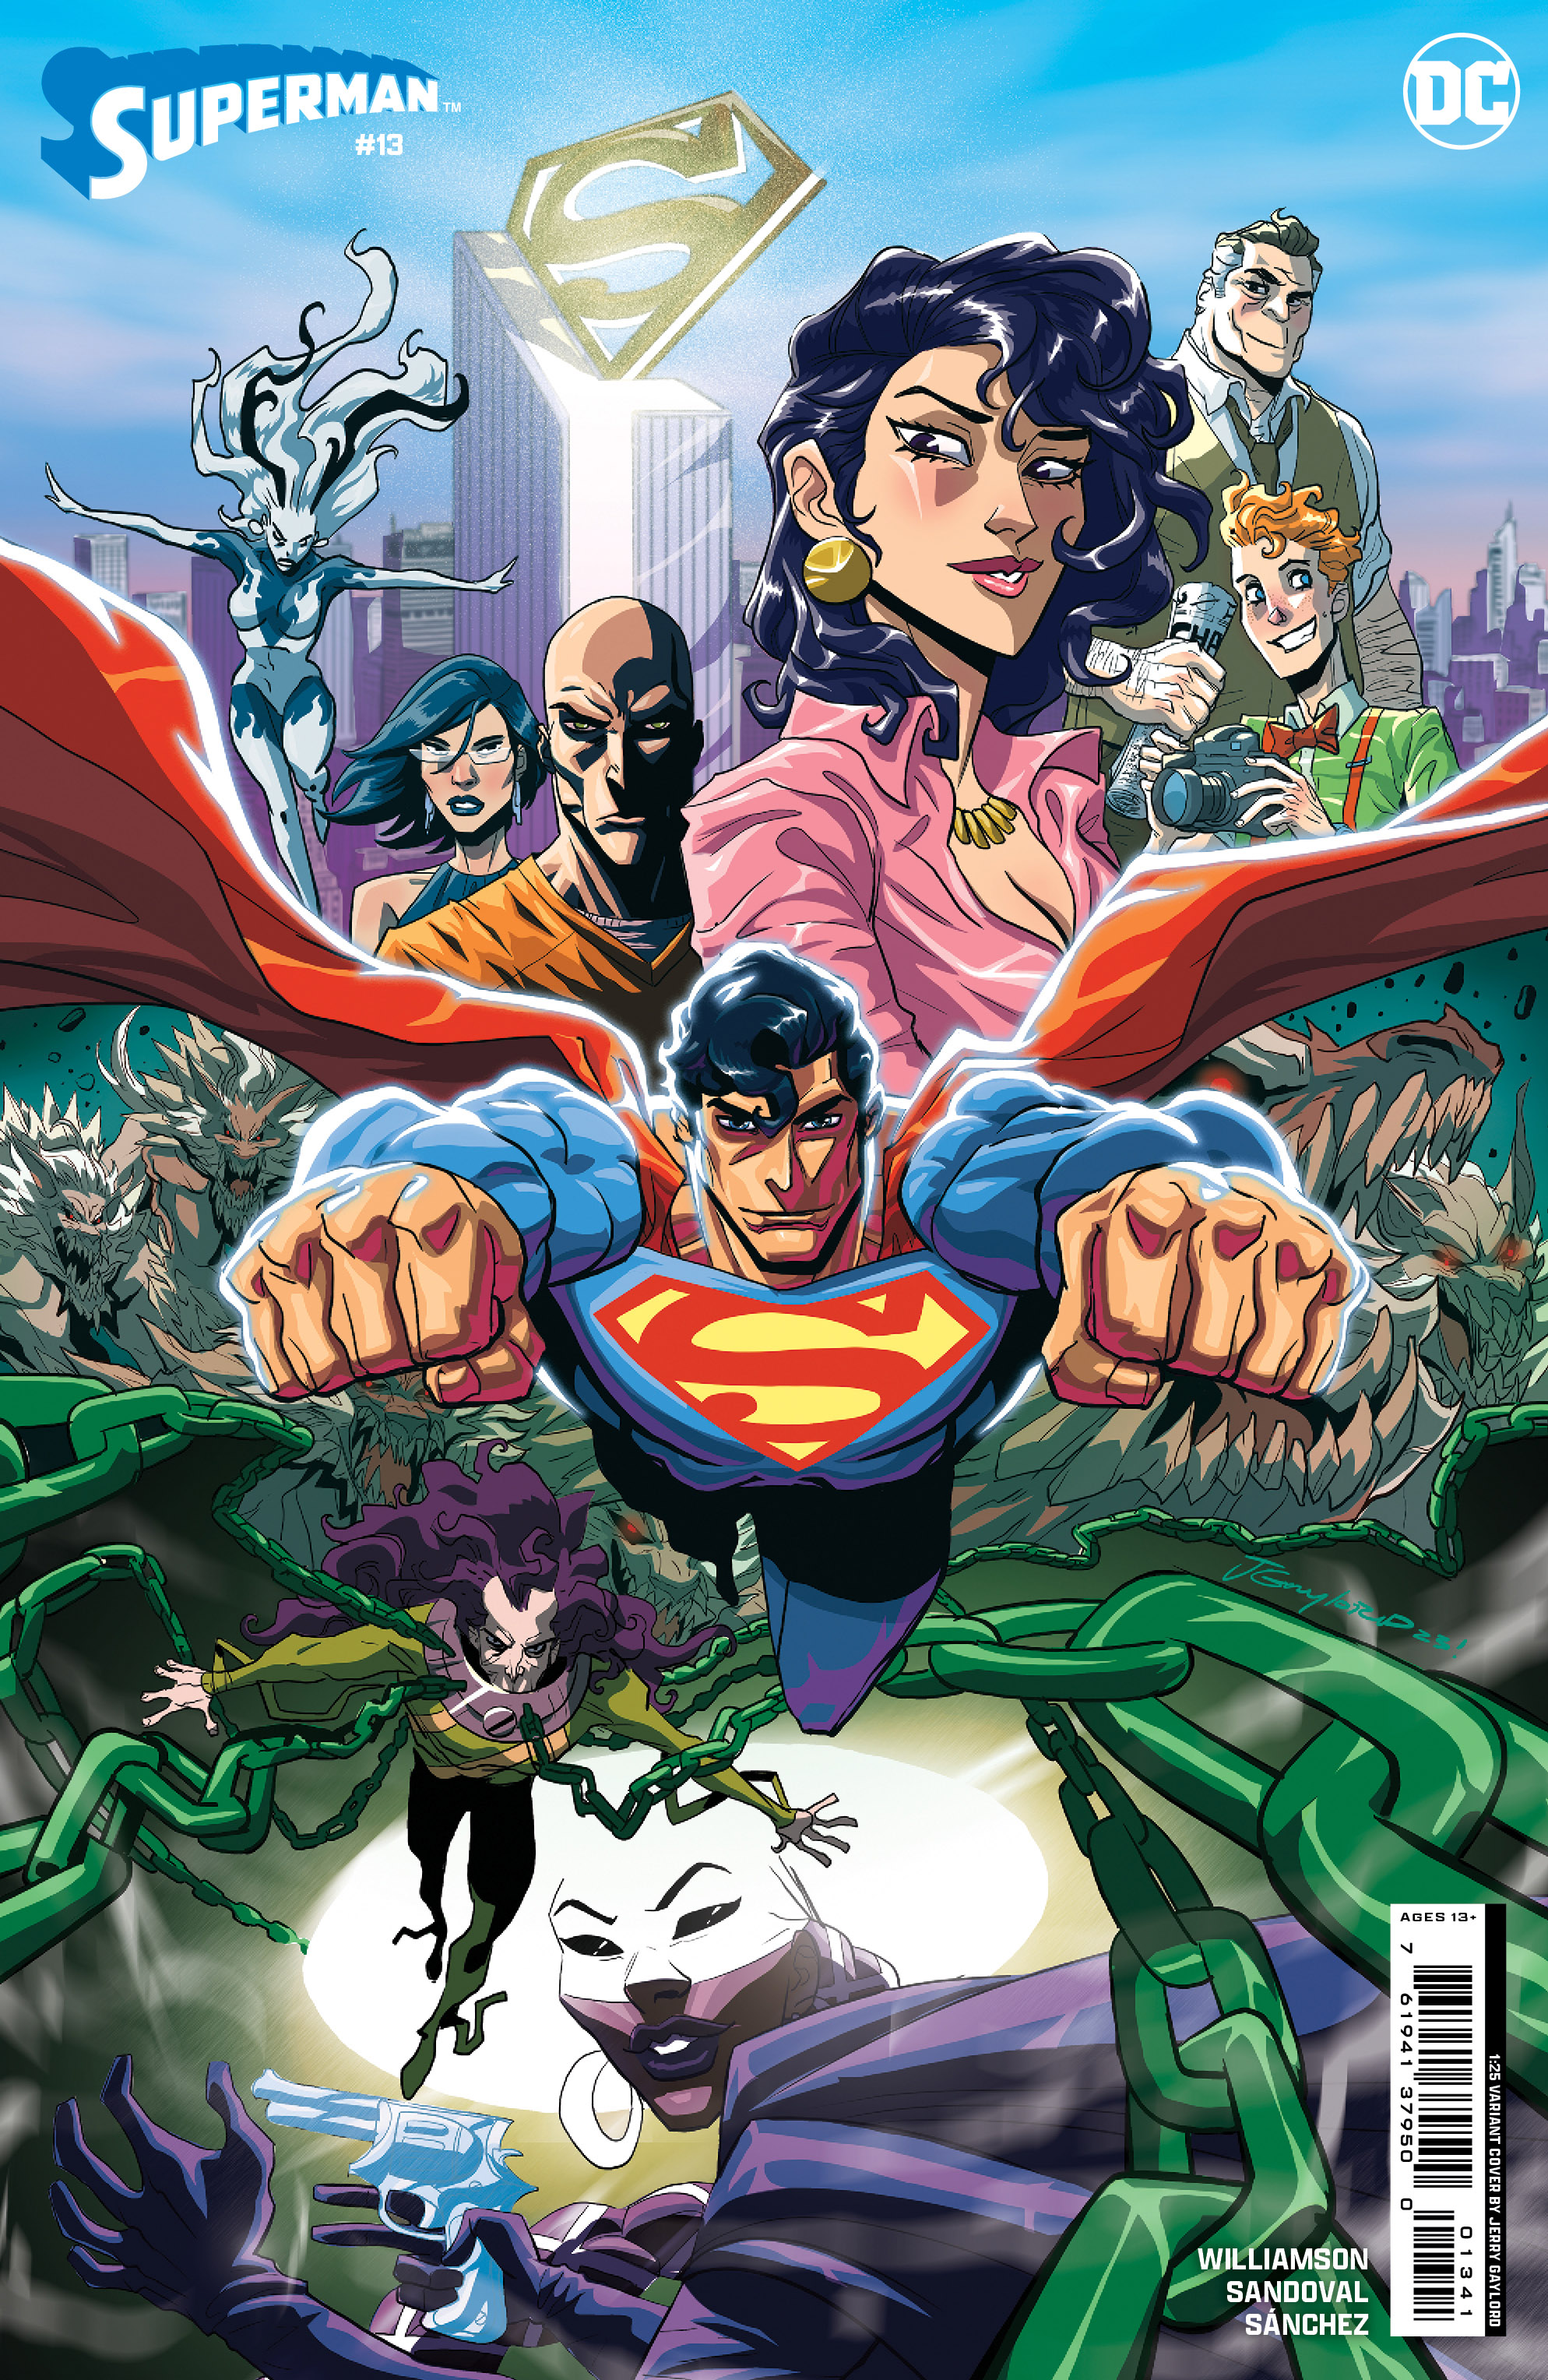 Superman #13 1 for 25 Variant Jerry Gaylord